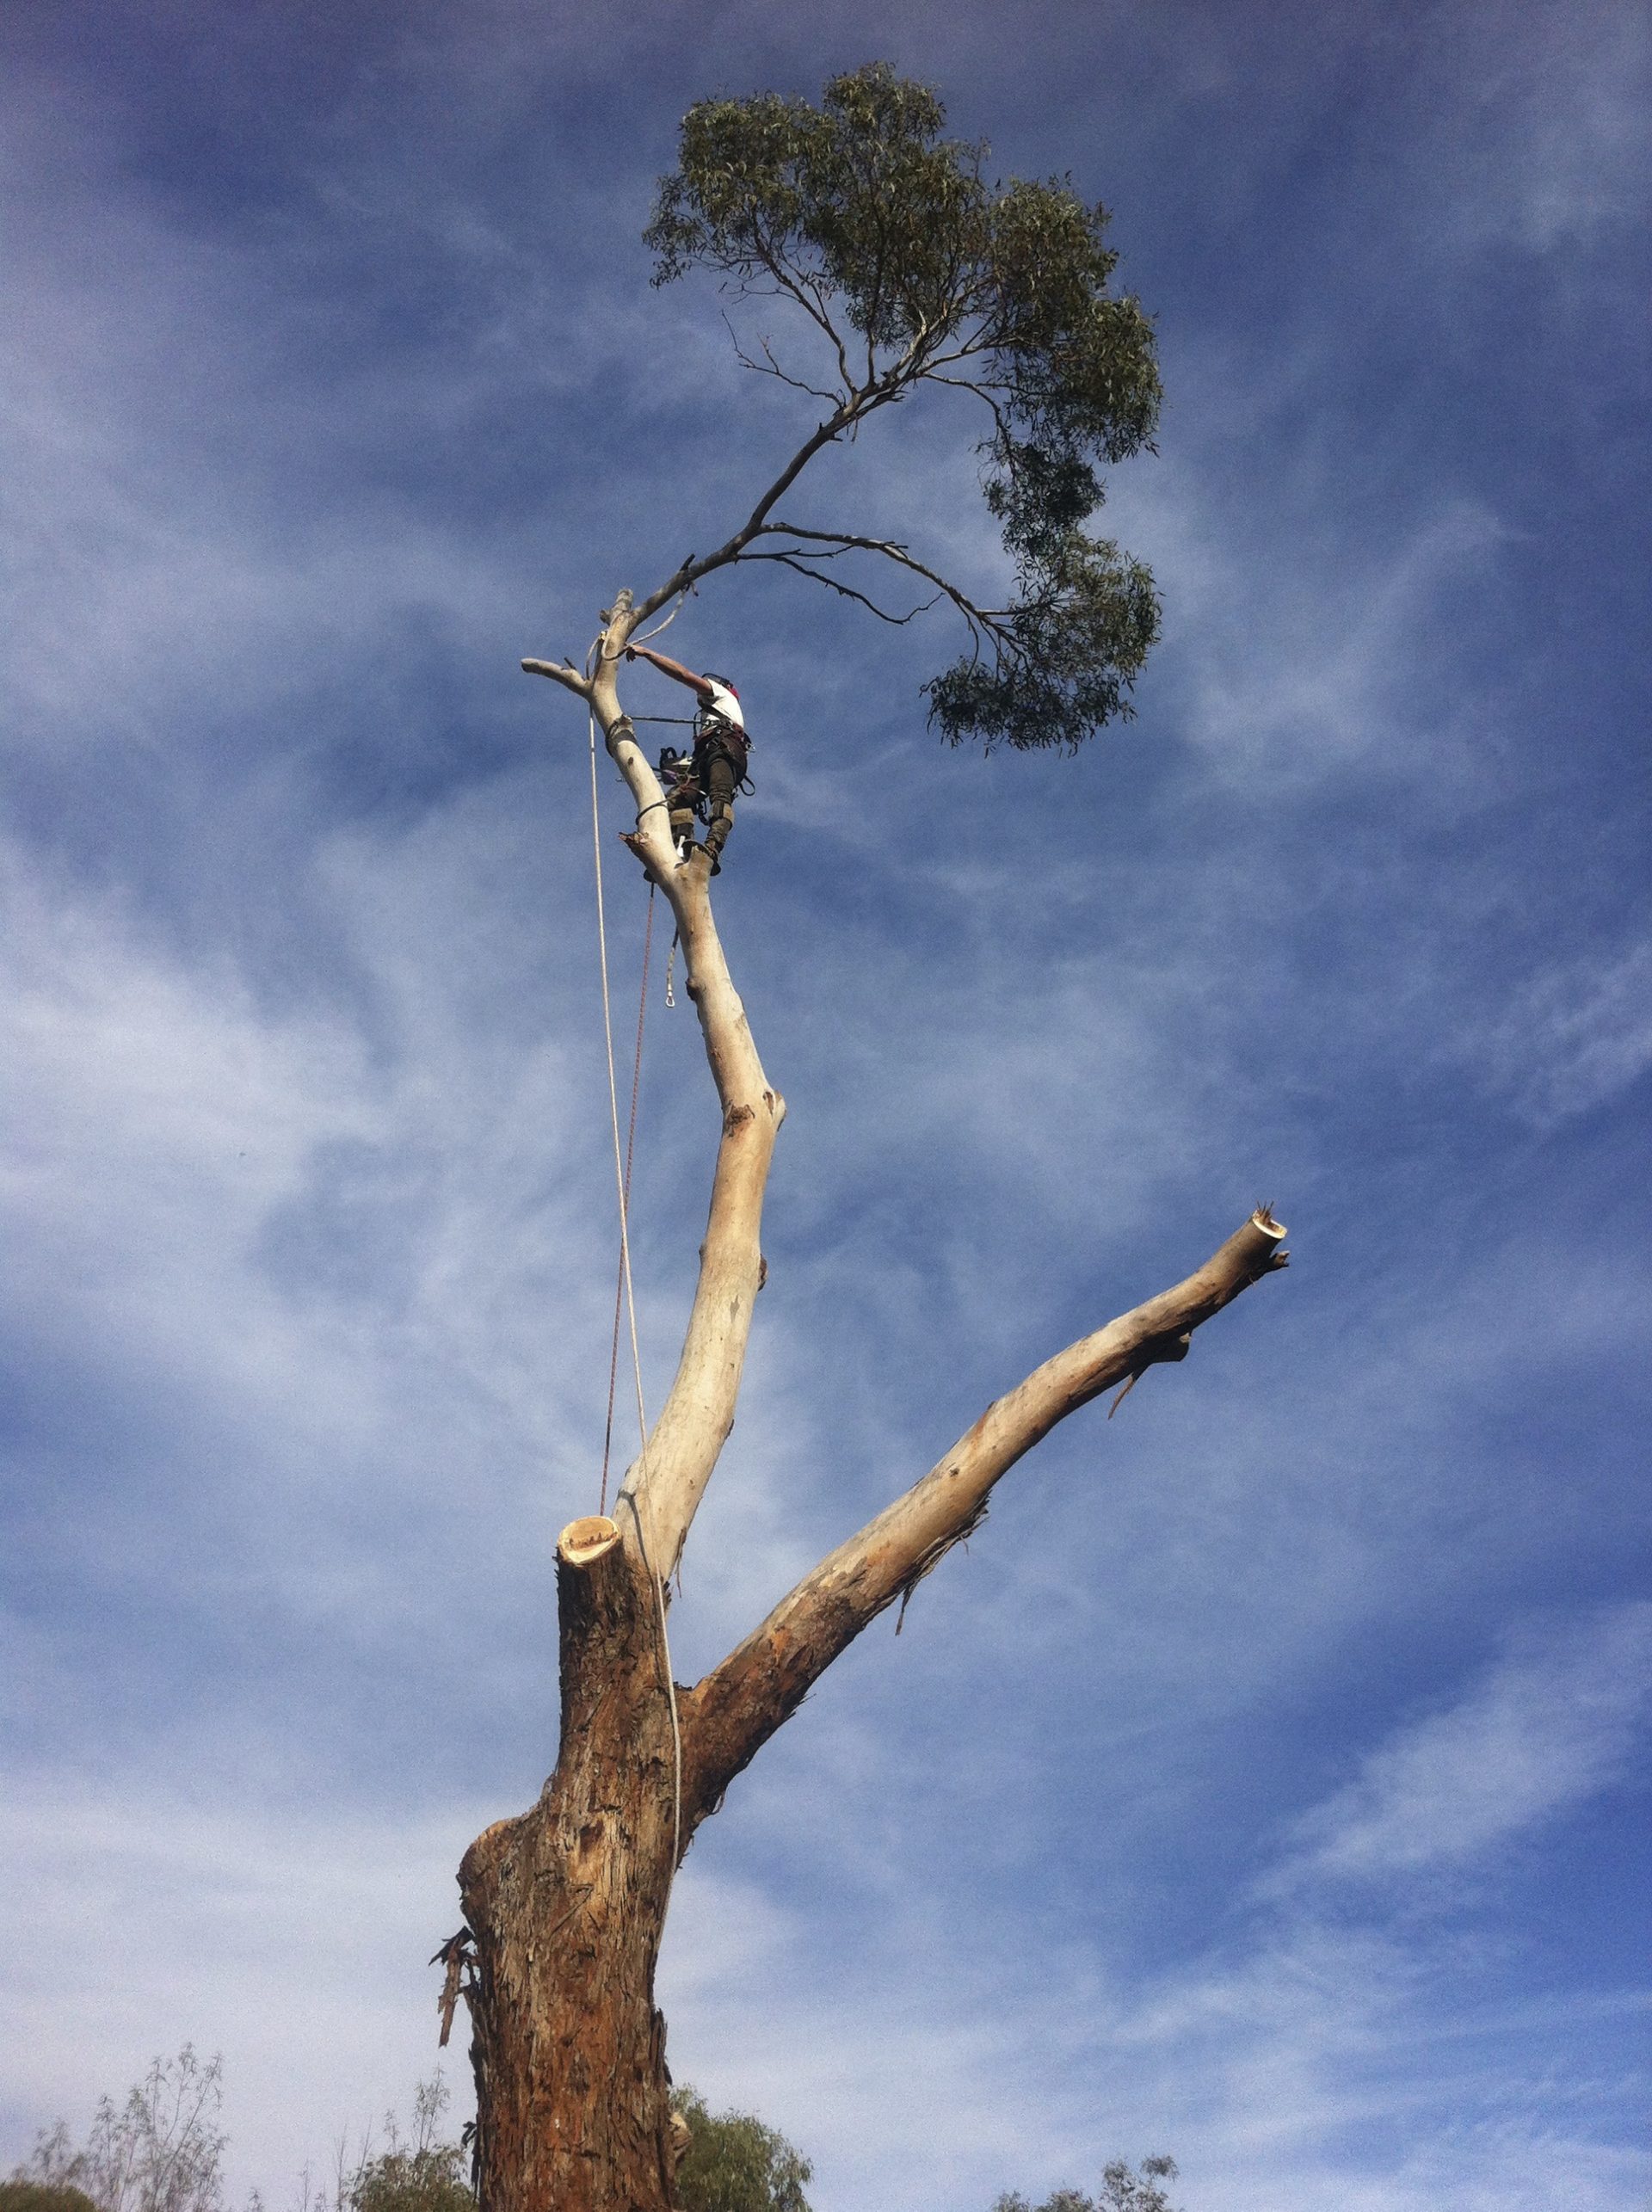 Seaford Tree Services include, pruning, removal, felling and lopping